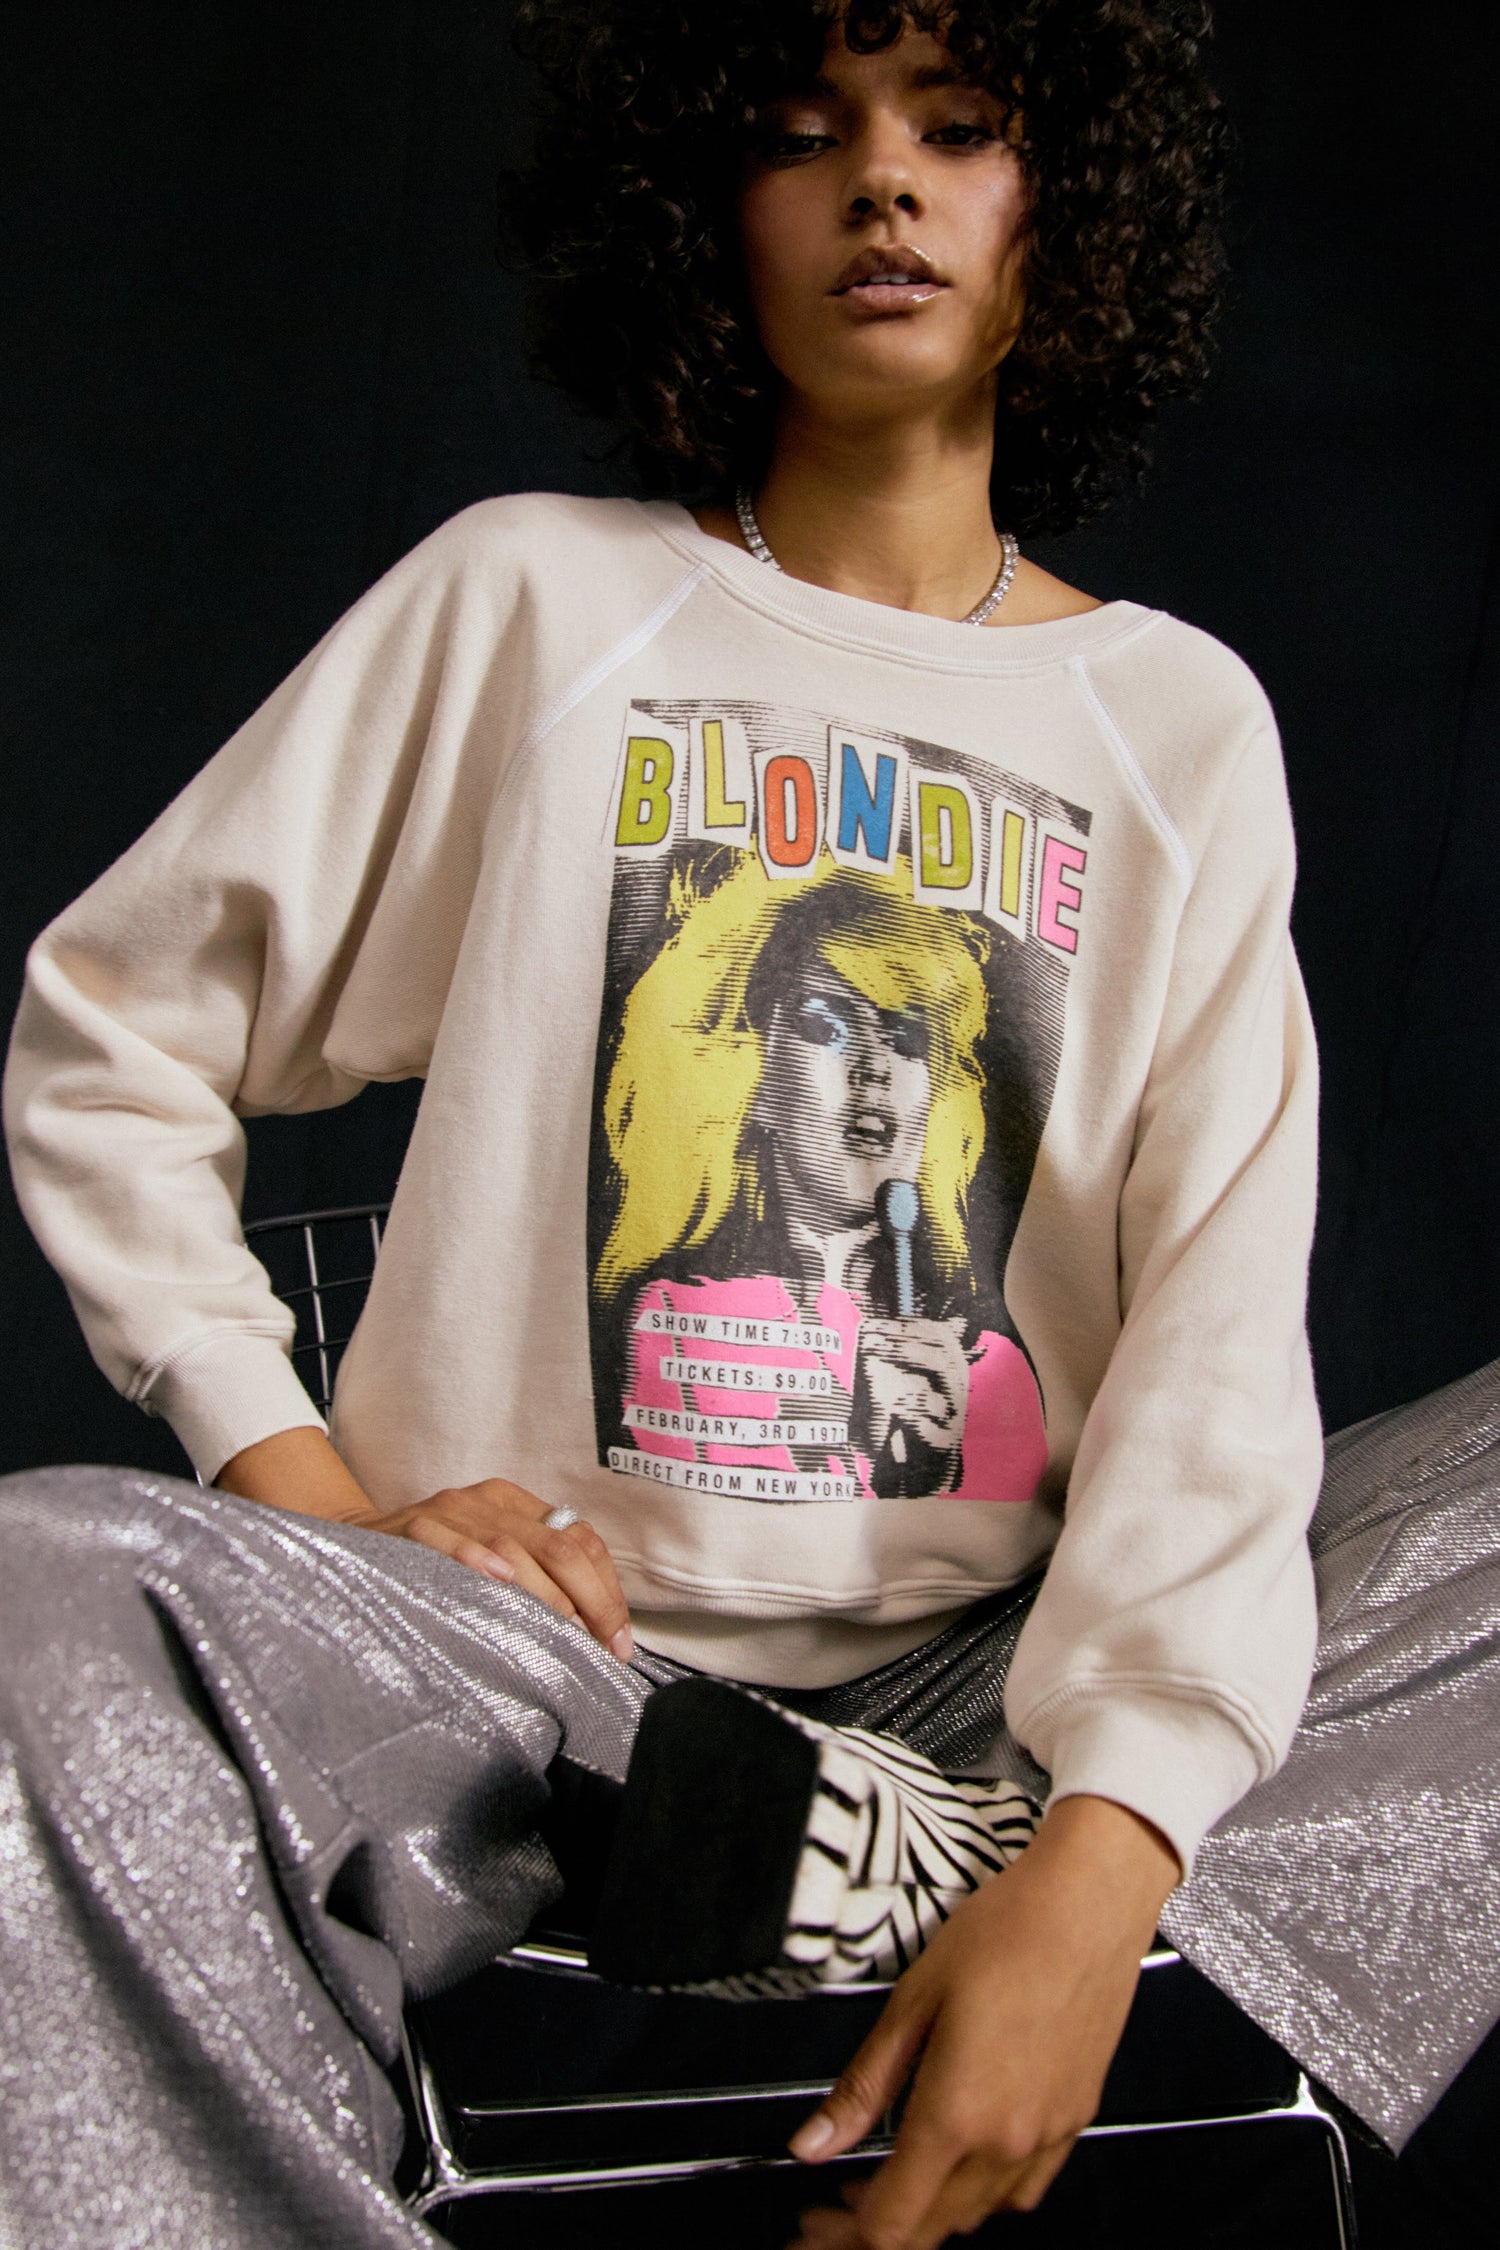 Dark curly-haired model featuring a dirty white crew with a portrait of Debbie Harry, an artsy large font "BLONDIE" in different colors, and a schedule of the show at the bottom left